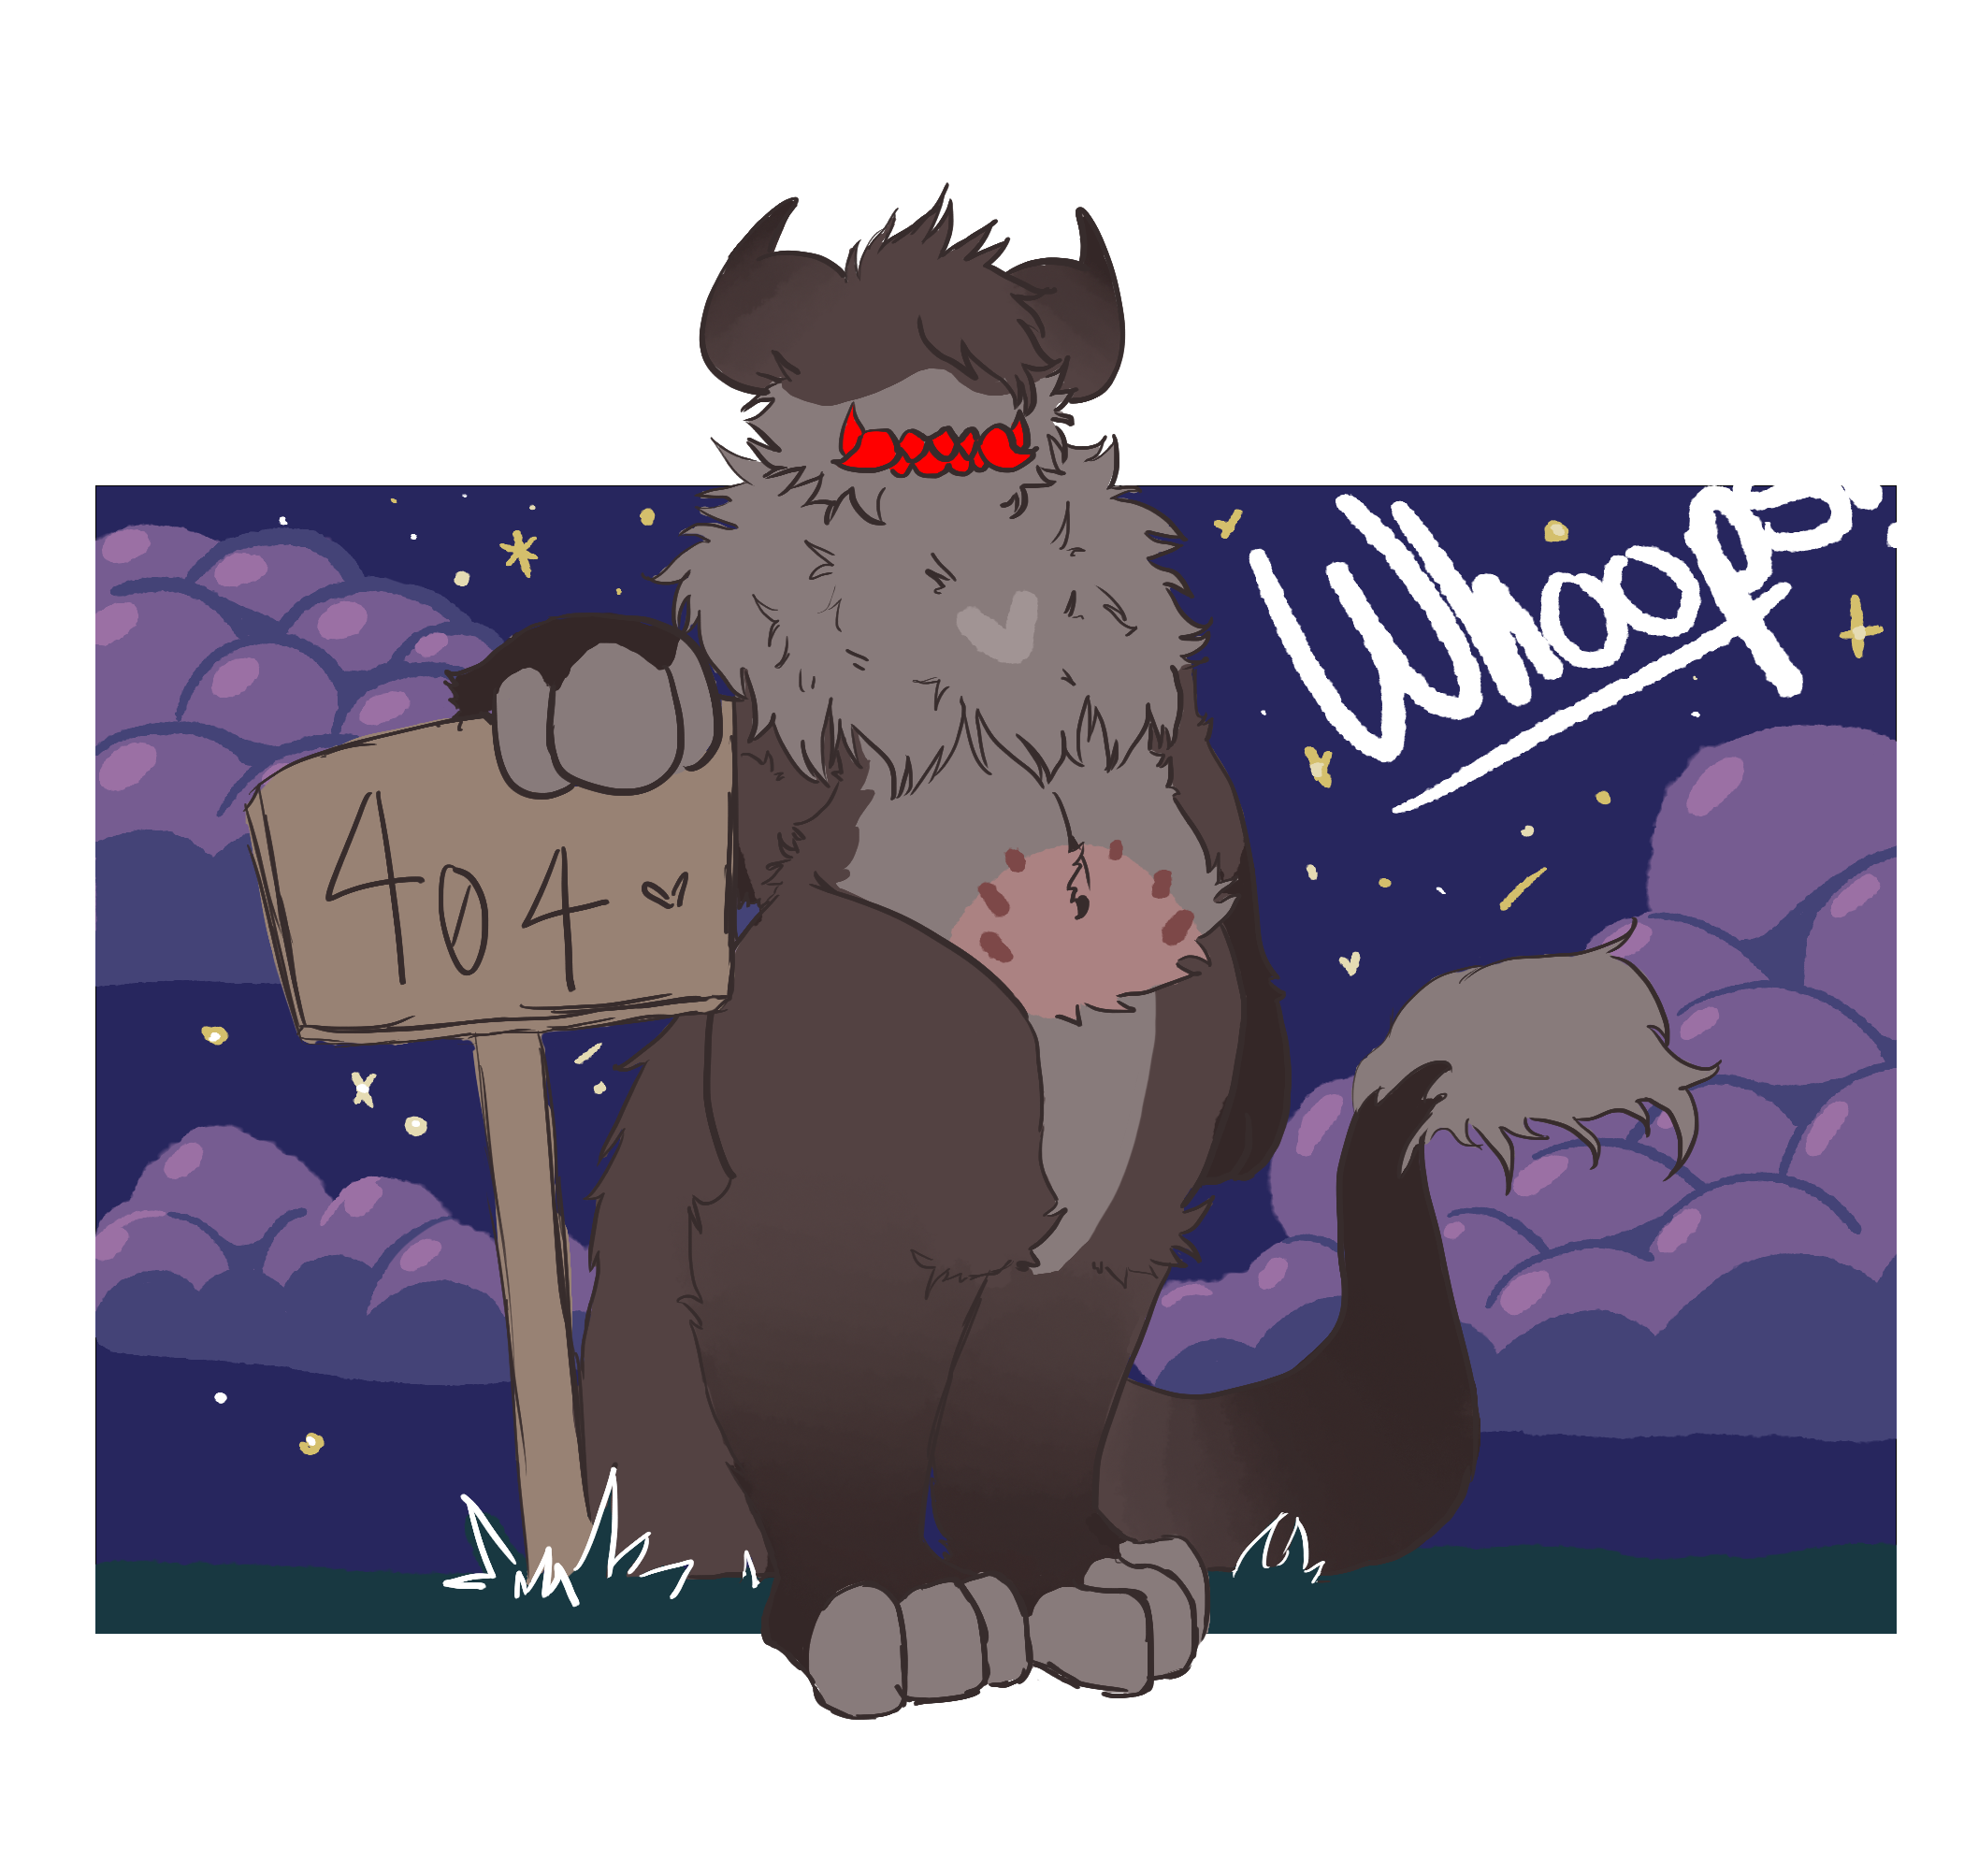 My character holding an error 404 sign.